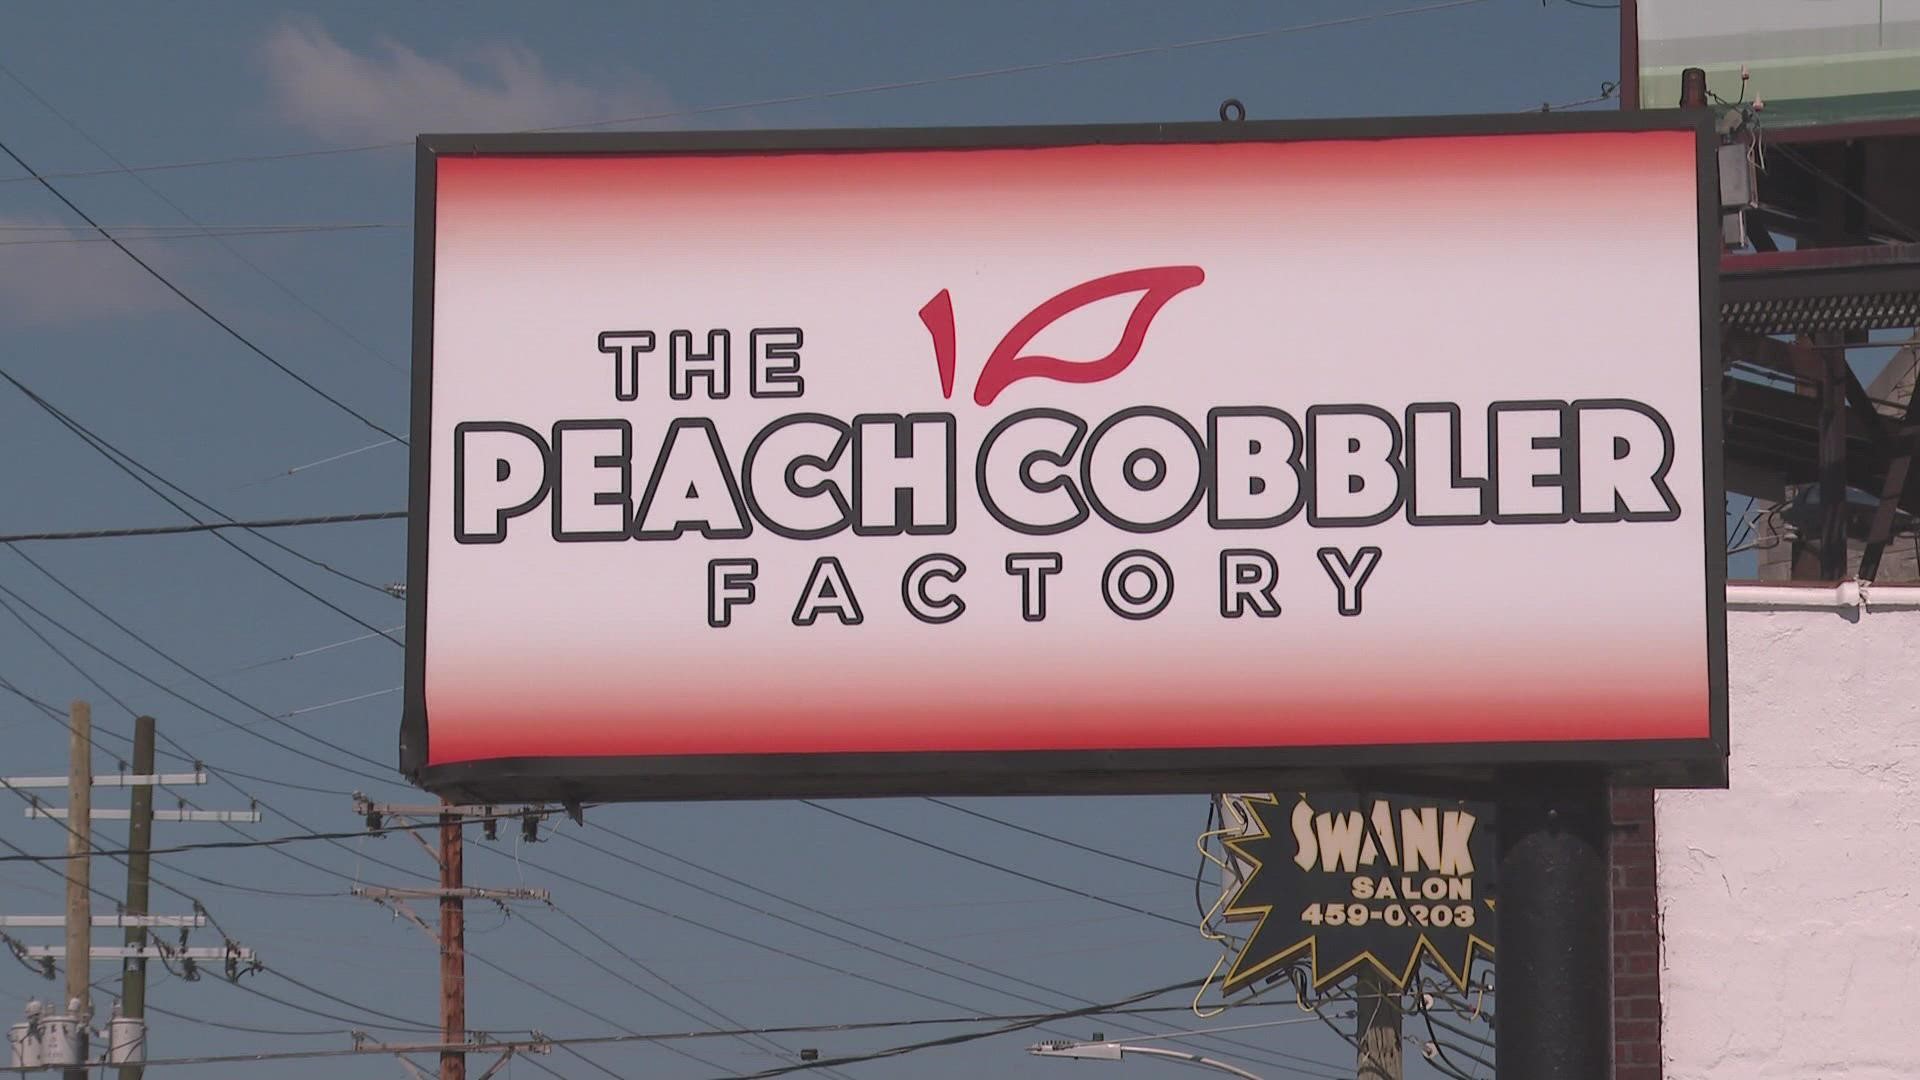 The Peach Cobbler Factory will offer 12 different kinds of cobbler and 12 banana puddings.